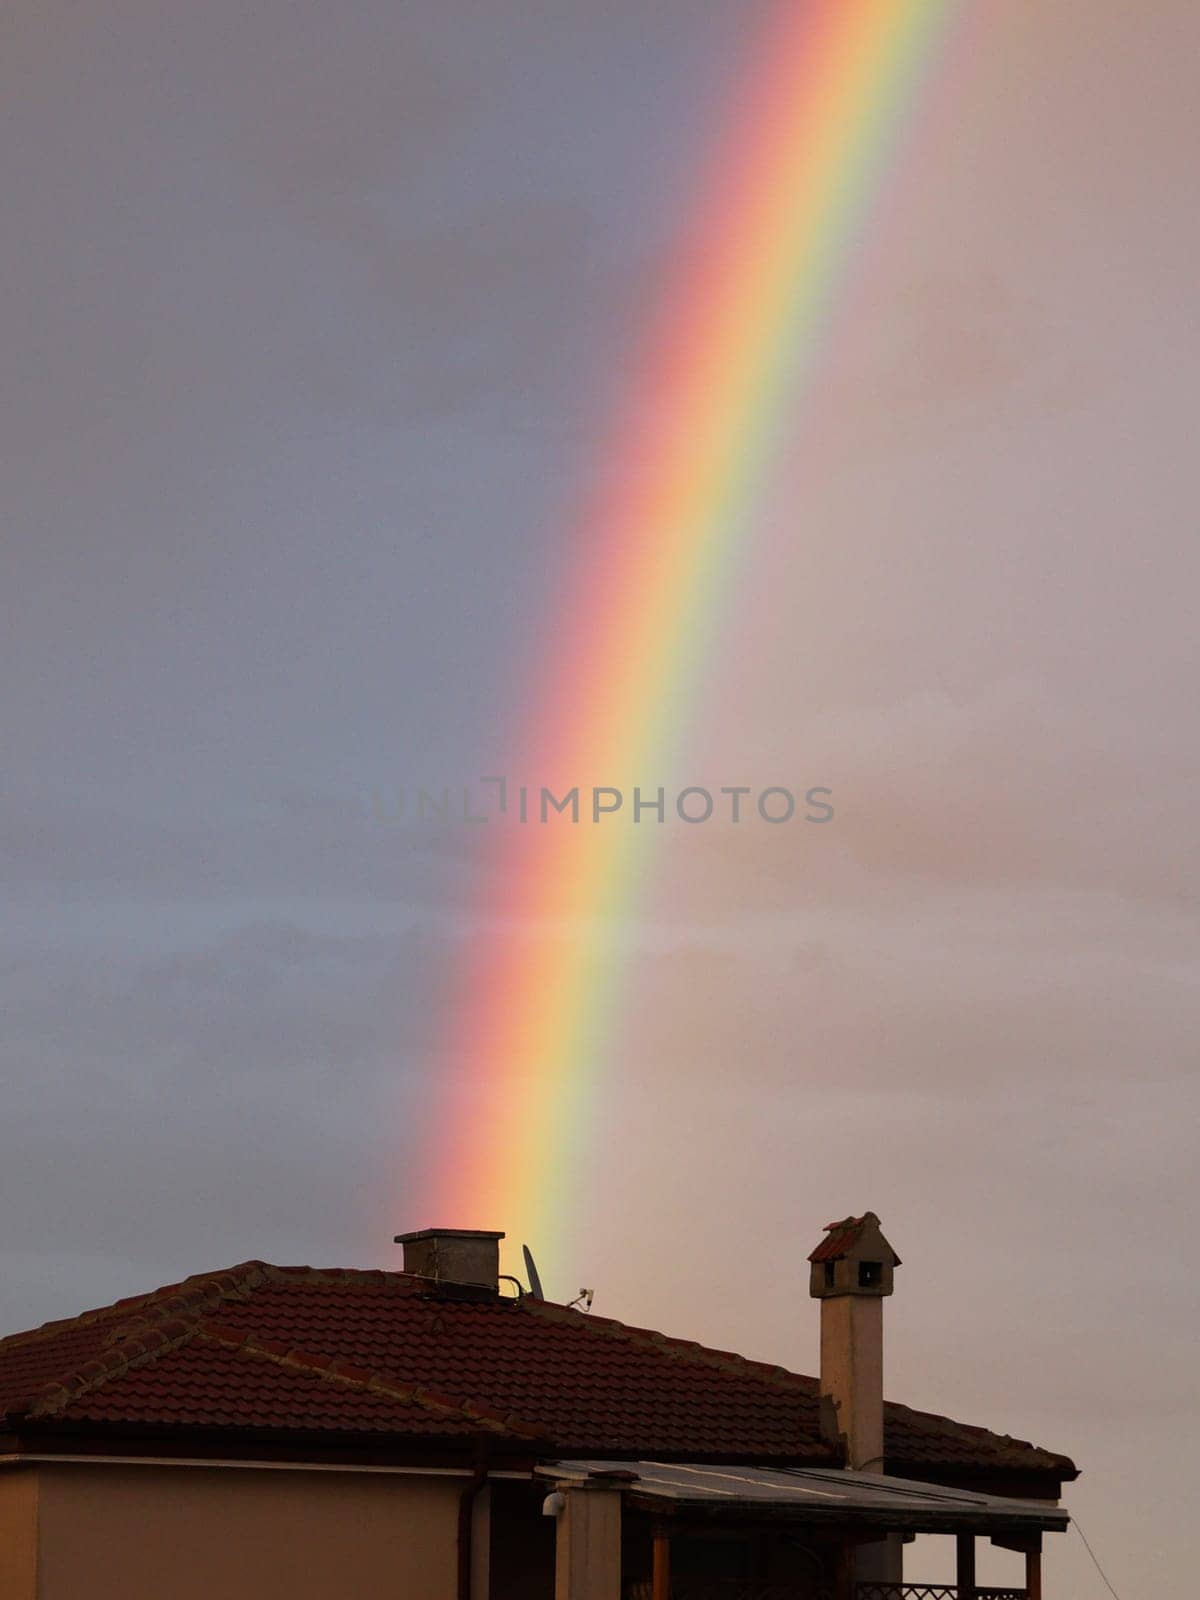 Multicolored rainbow in the sky after the rain over the roof of the house close-up